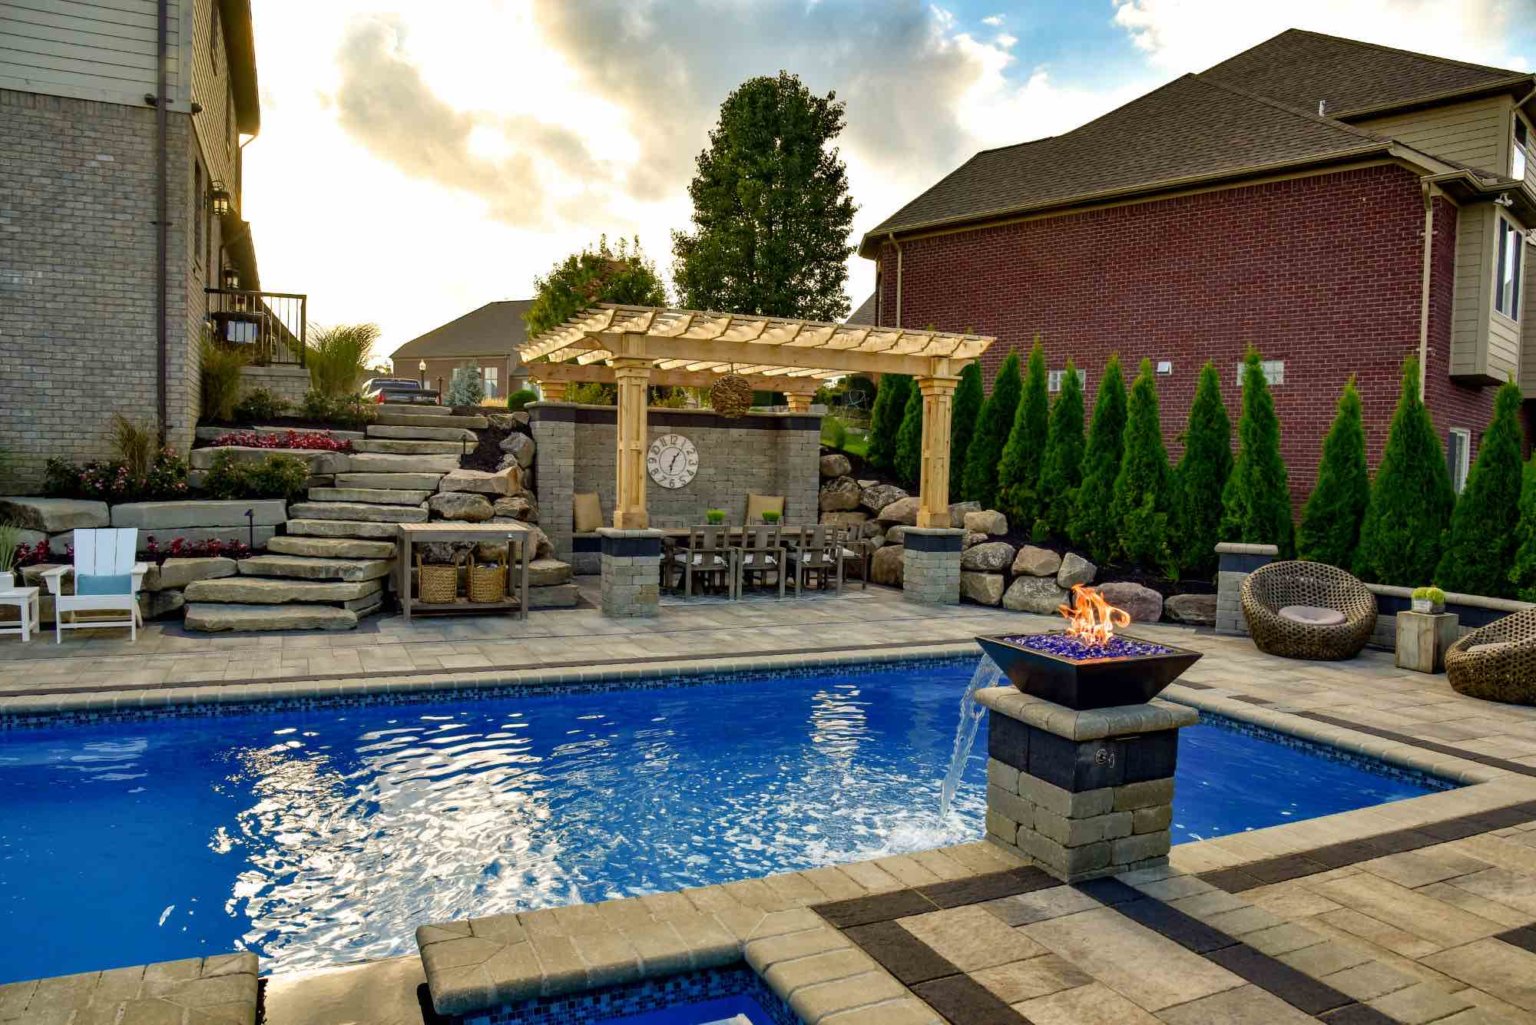 Arborvitae privacy trees  fiberglass pool designers in Shelby Twp, Mi landscape design project in Shelby Township cascade fiberglass swimming pool design with a raised spillover spa  custom cedar pergola  shade structure for outdoor living  fiberglass pool and spa design Pergola Designs Outdoor Pergolas Pergola Ideas Custom Pergola Construction Pergola Kits Pergola Installation Michigan Landscape Design Landscape Design Services in Michigan Professional Landscape Design Michigan Michigan Landscape Architects Best Landscape Designers in Michigan